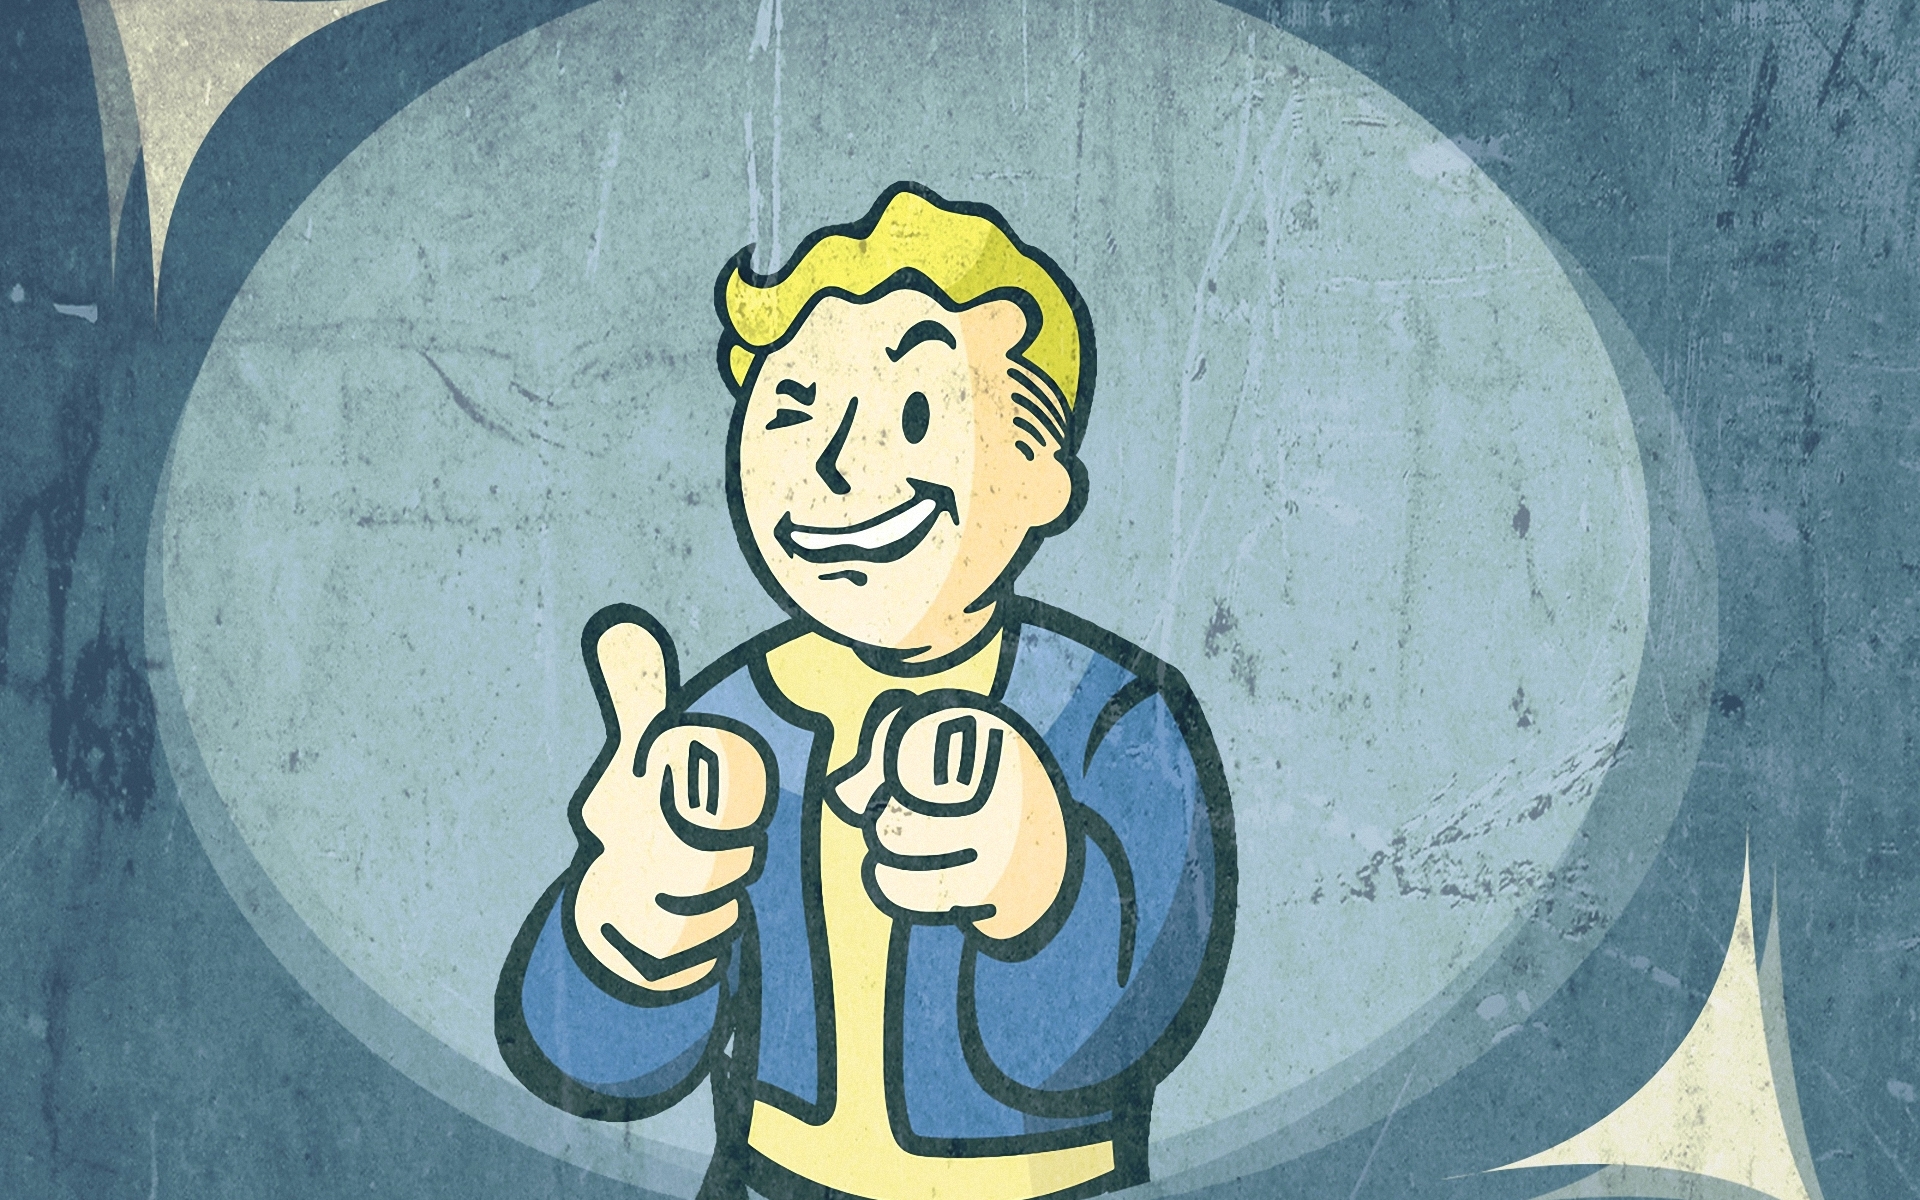 Video Game Fallout 3 HD Wallpaper | Background Image